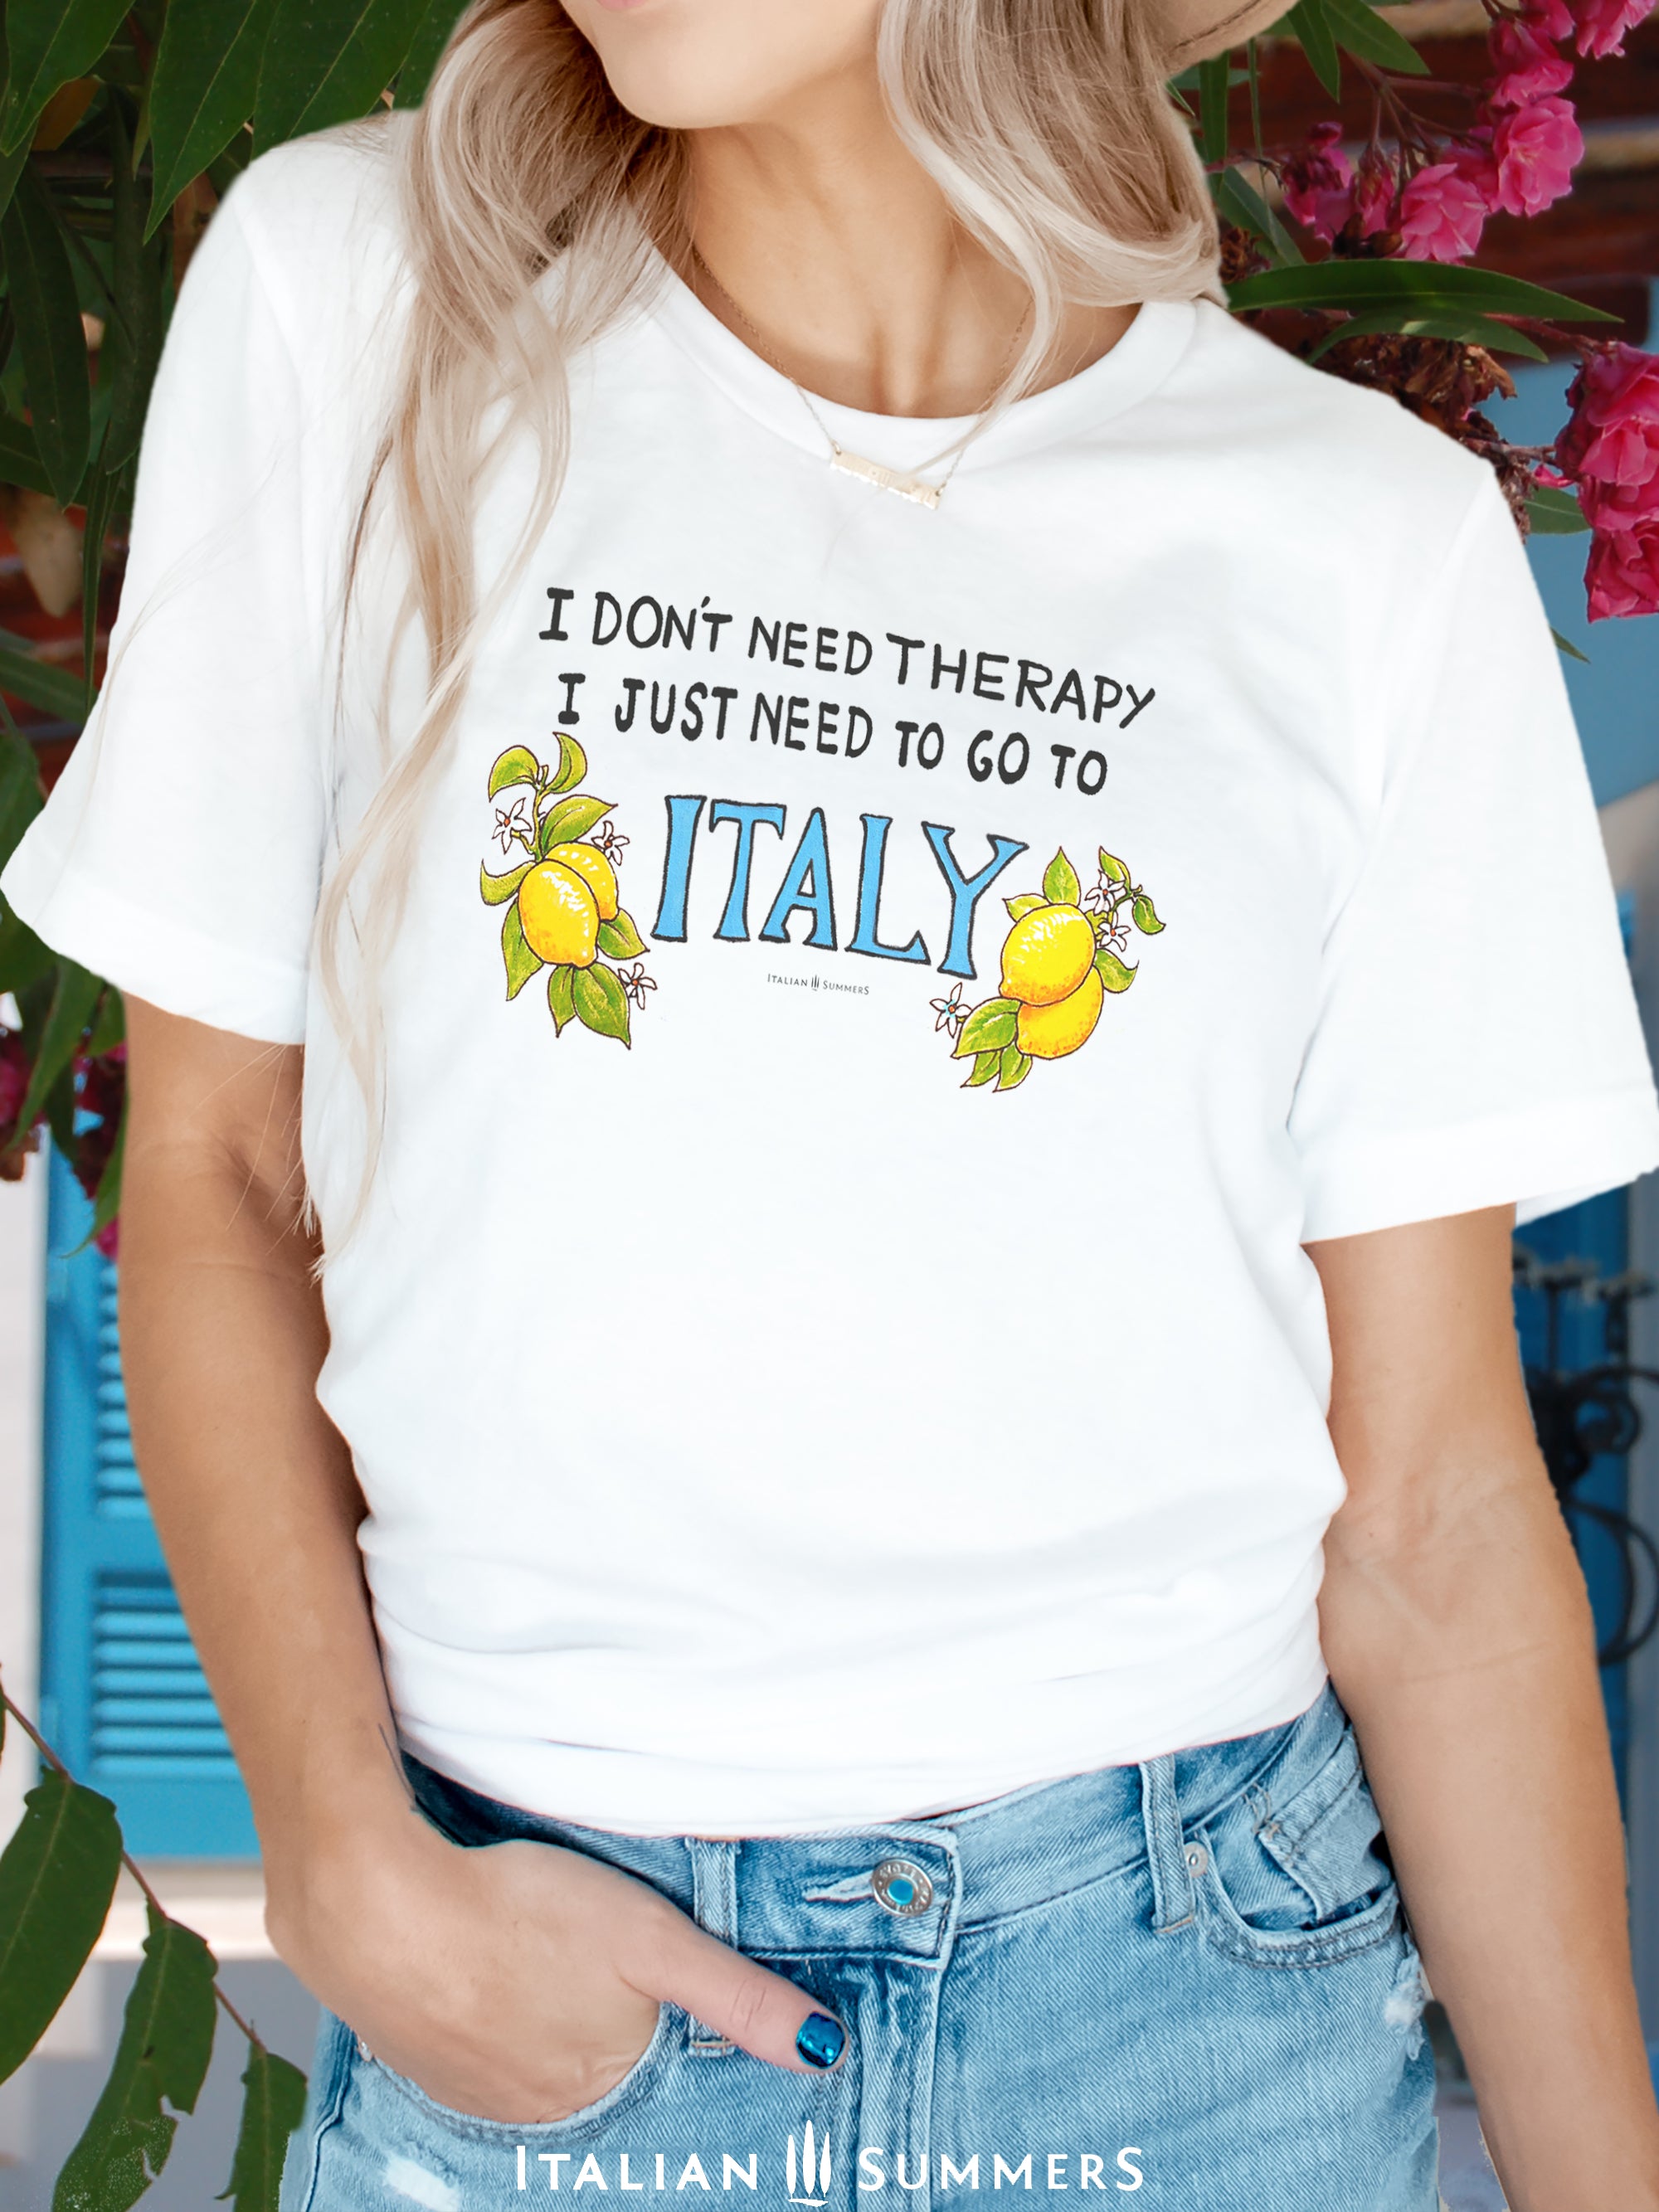 Italy shirt I don't need therapy, I just need to go to Italy by Italian Summers